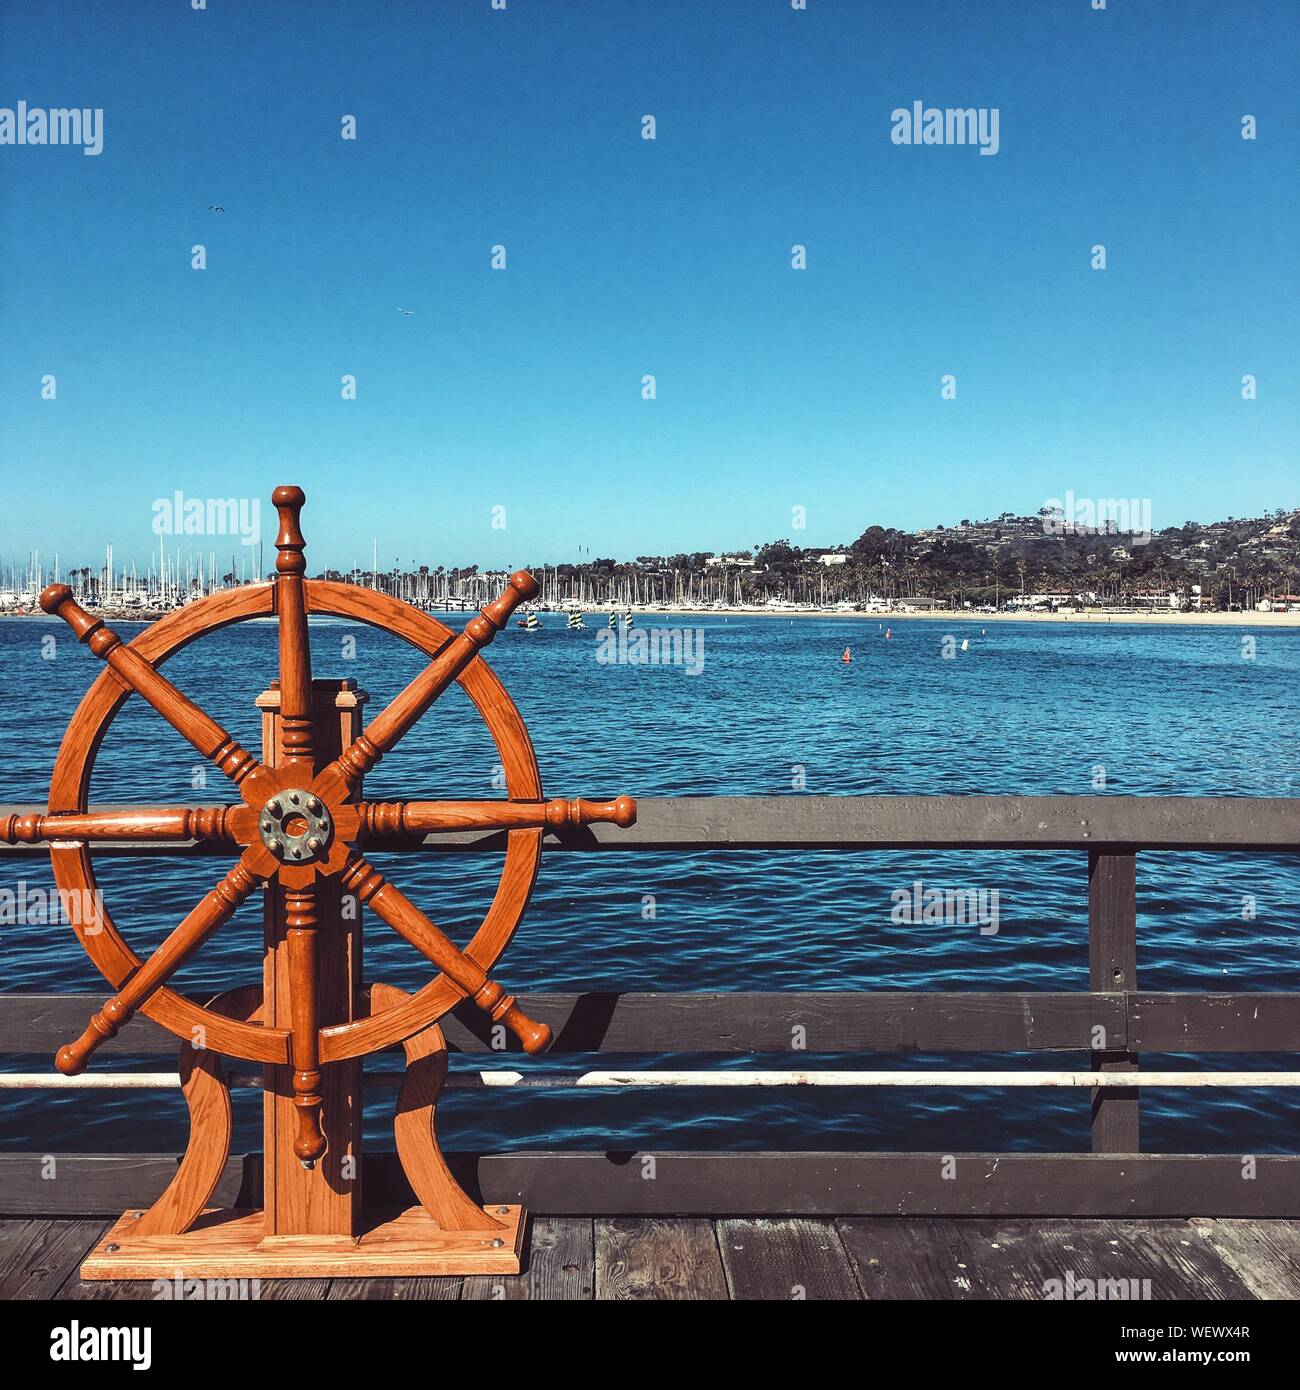 Wooden Helm On Pier Against Sea Stock Photo